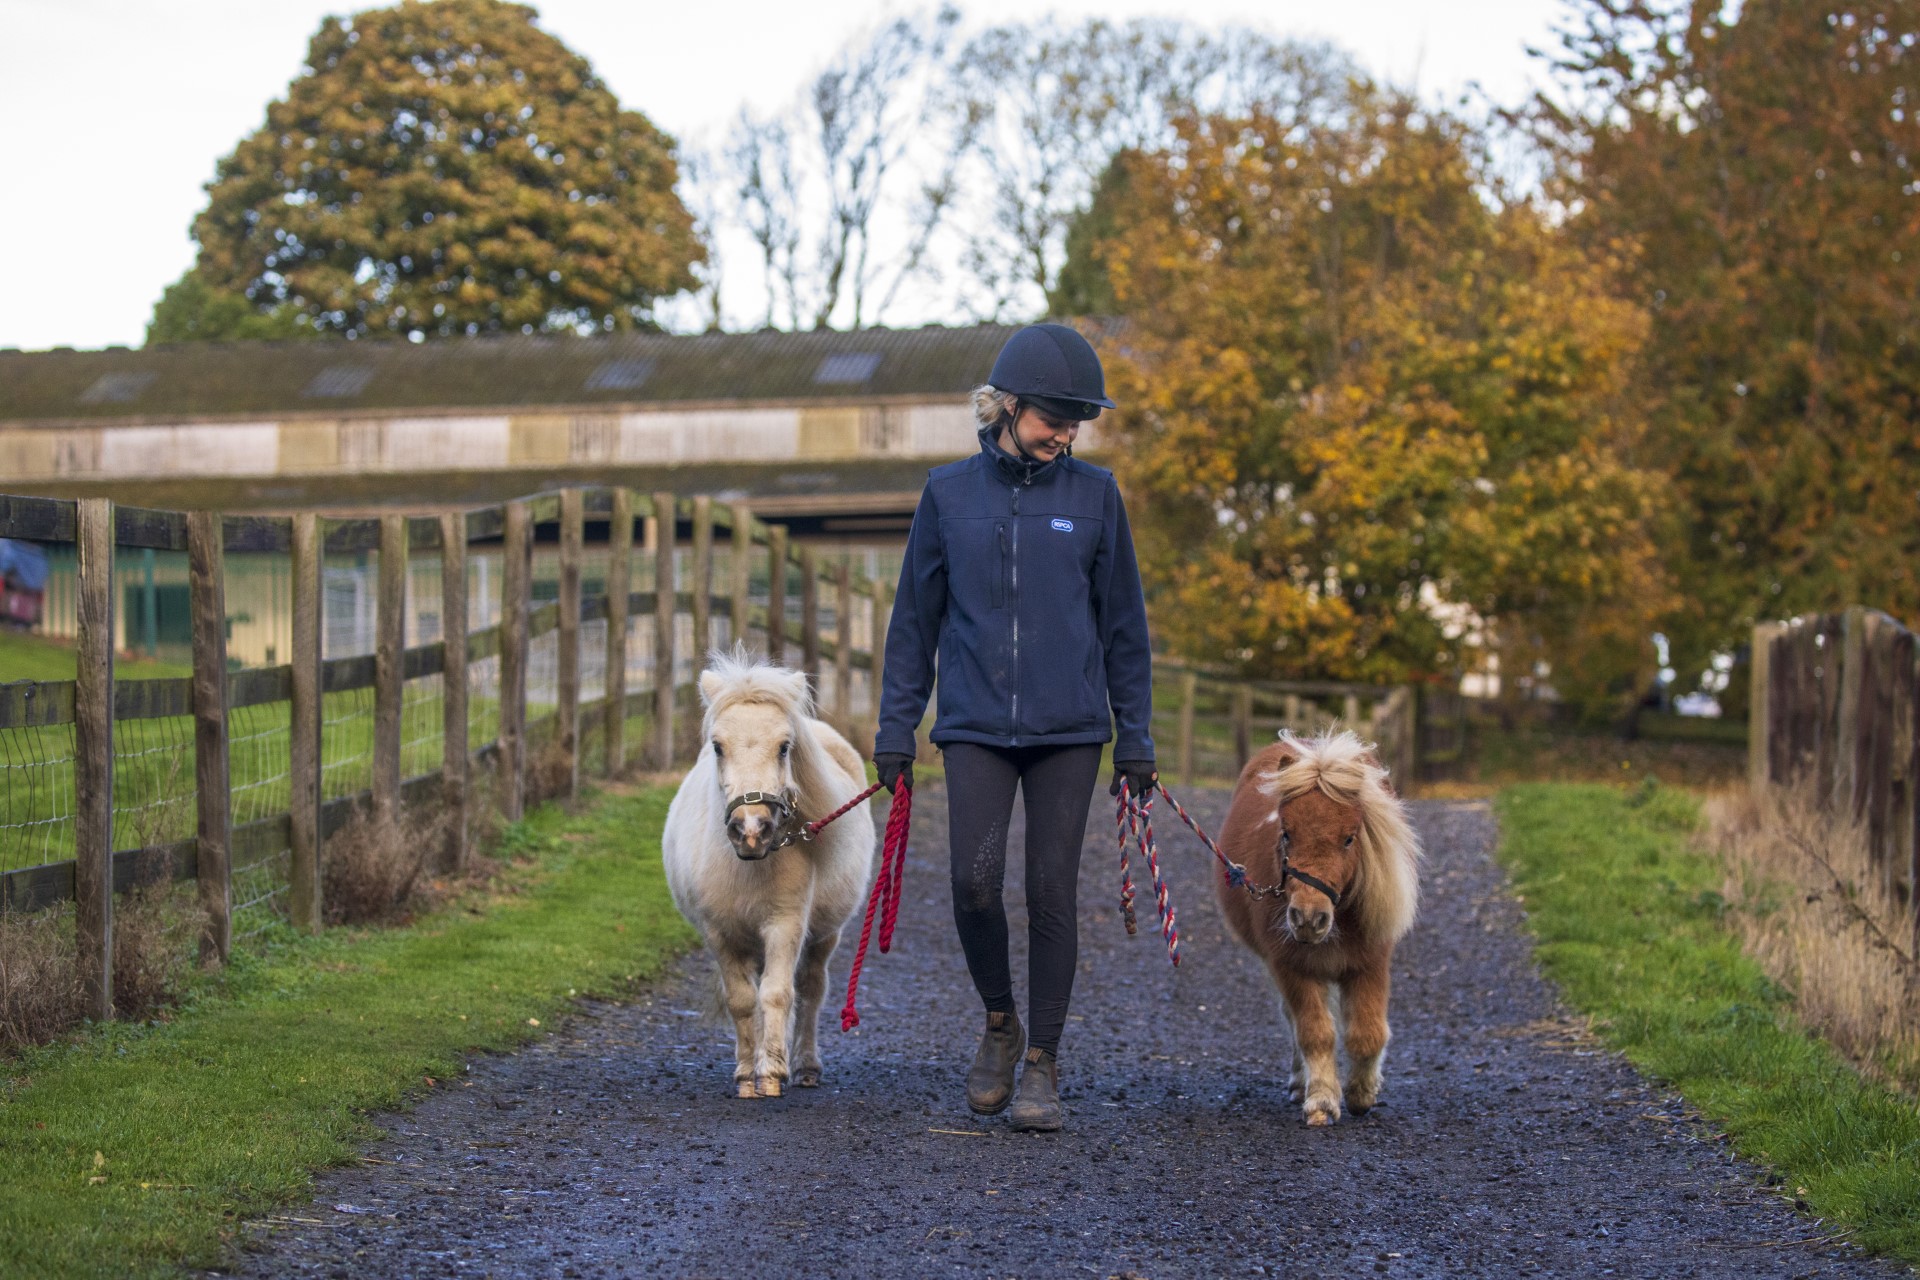 rspca worker walking with horses